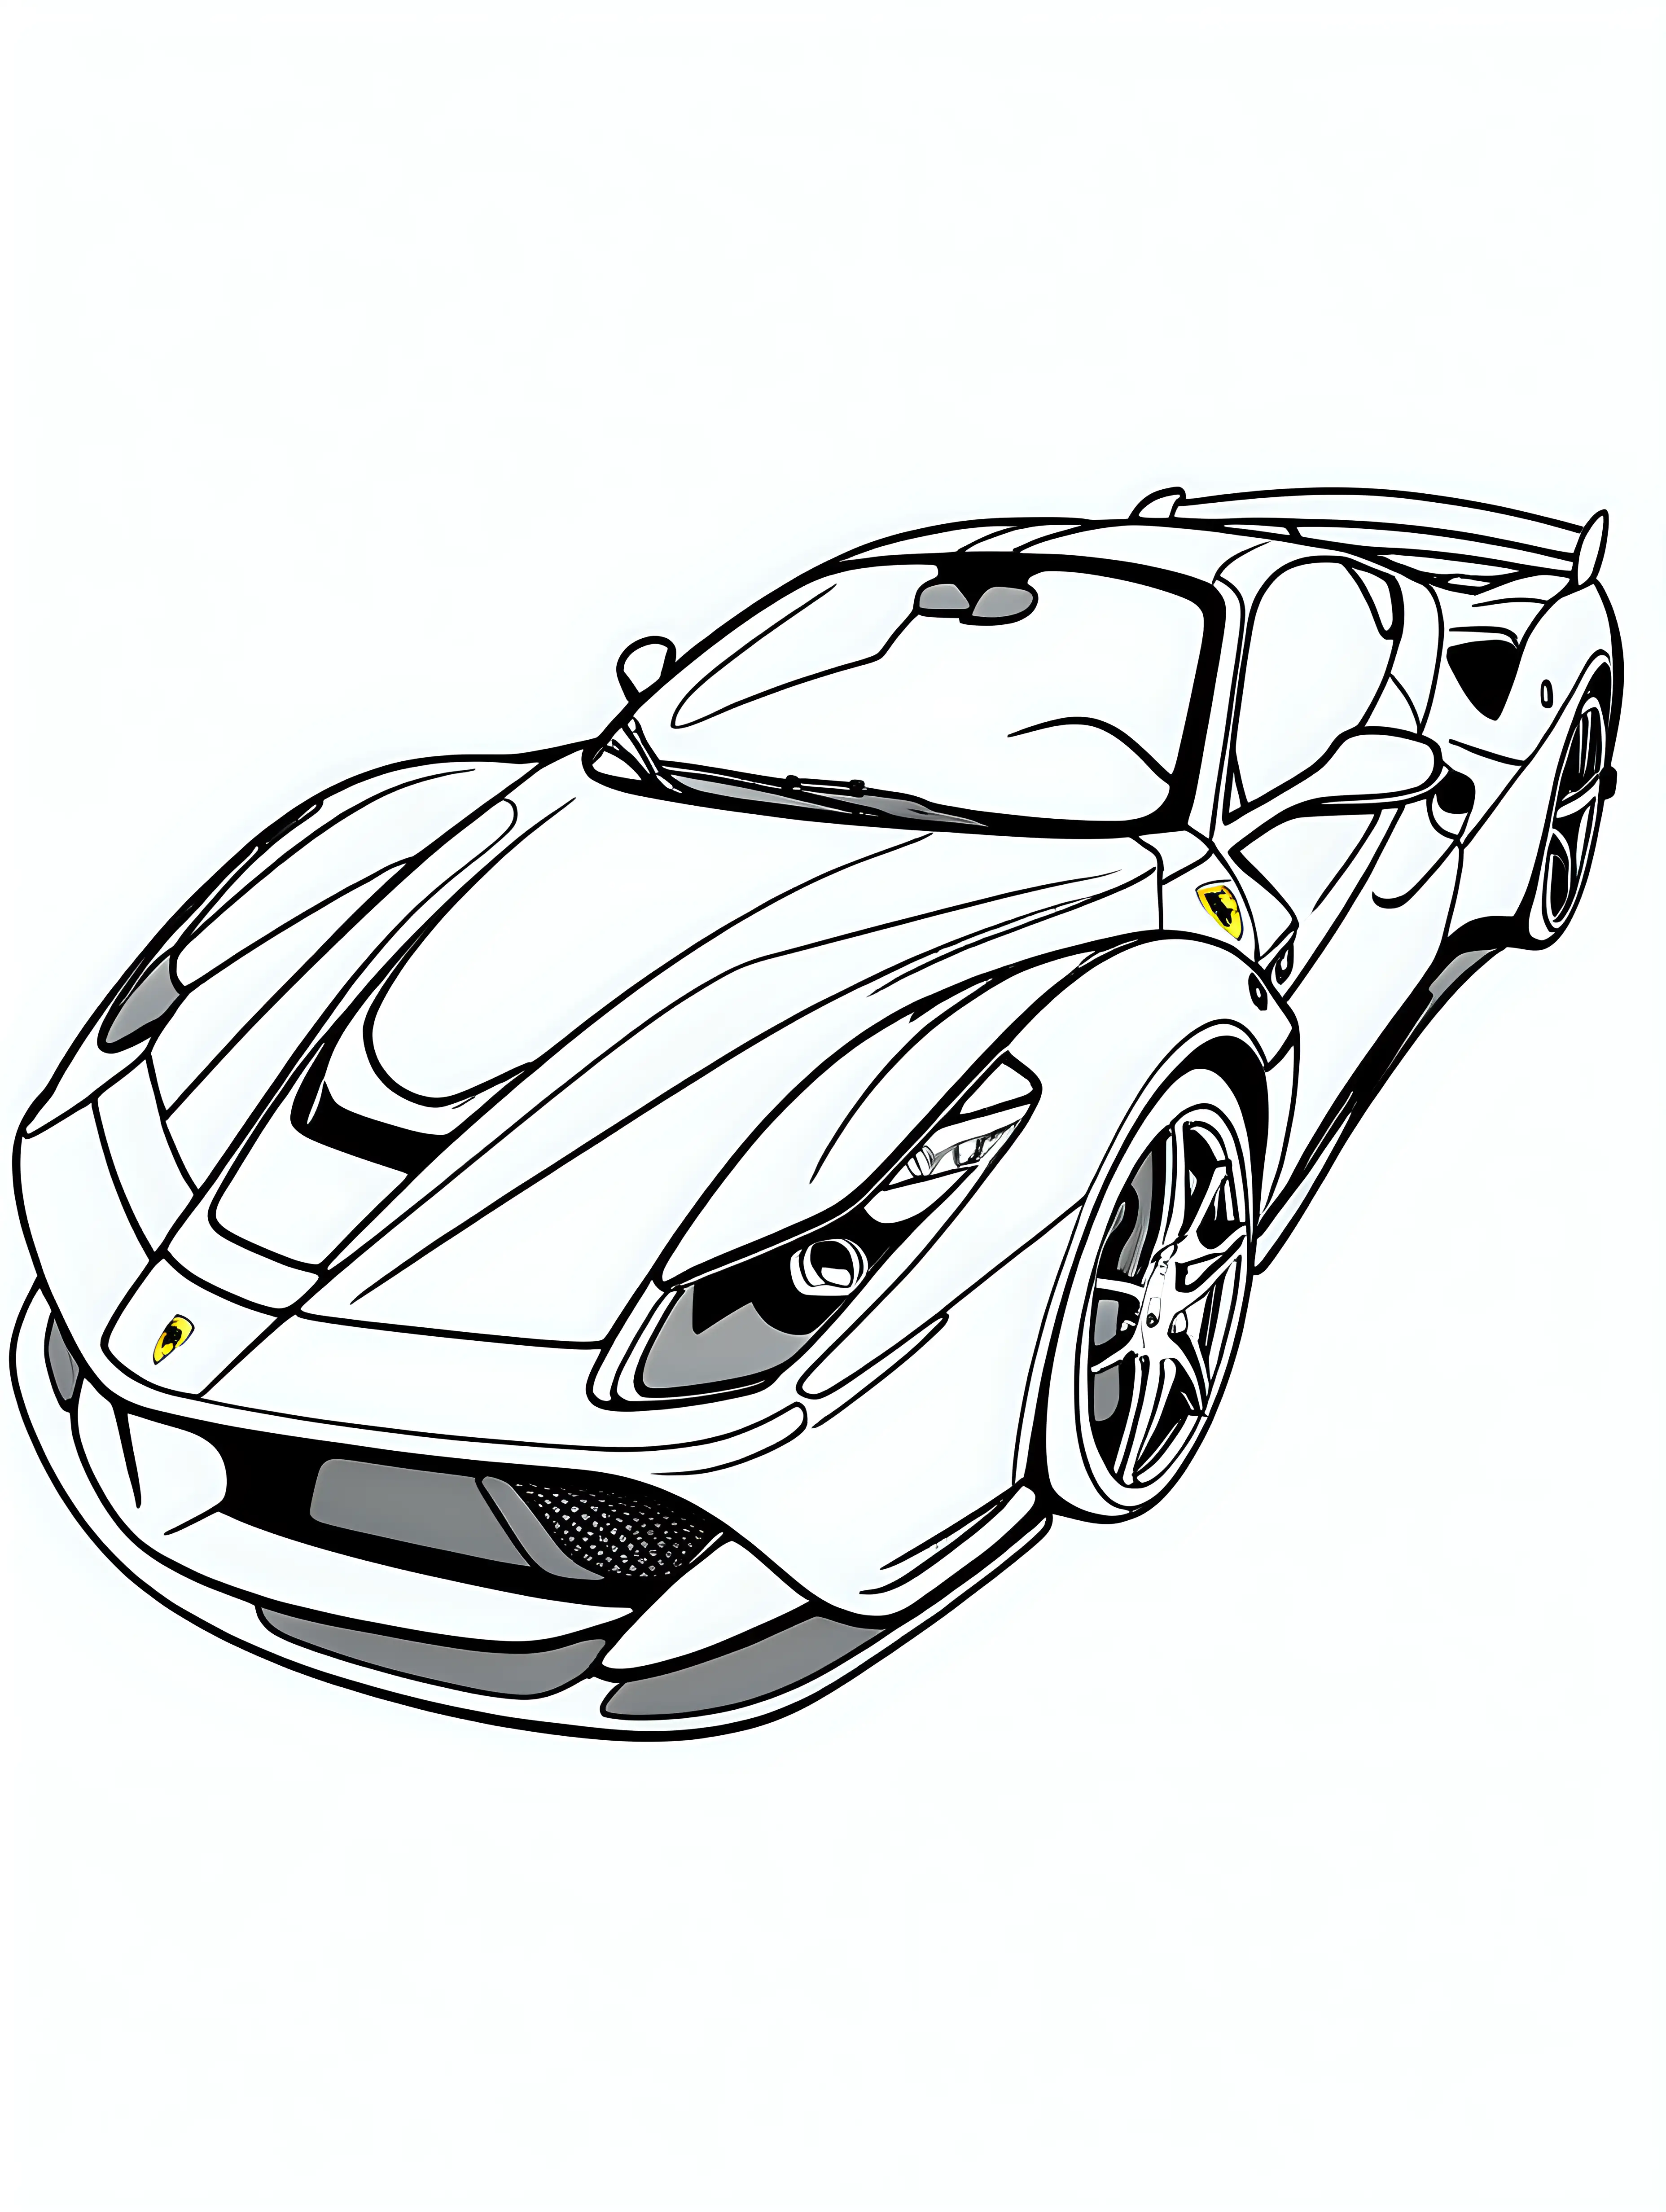 coloring page for kids, ferrari
car, black lines white background